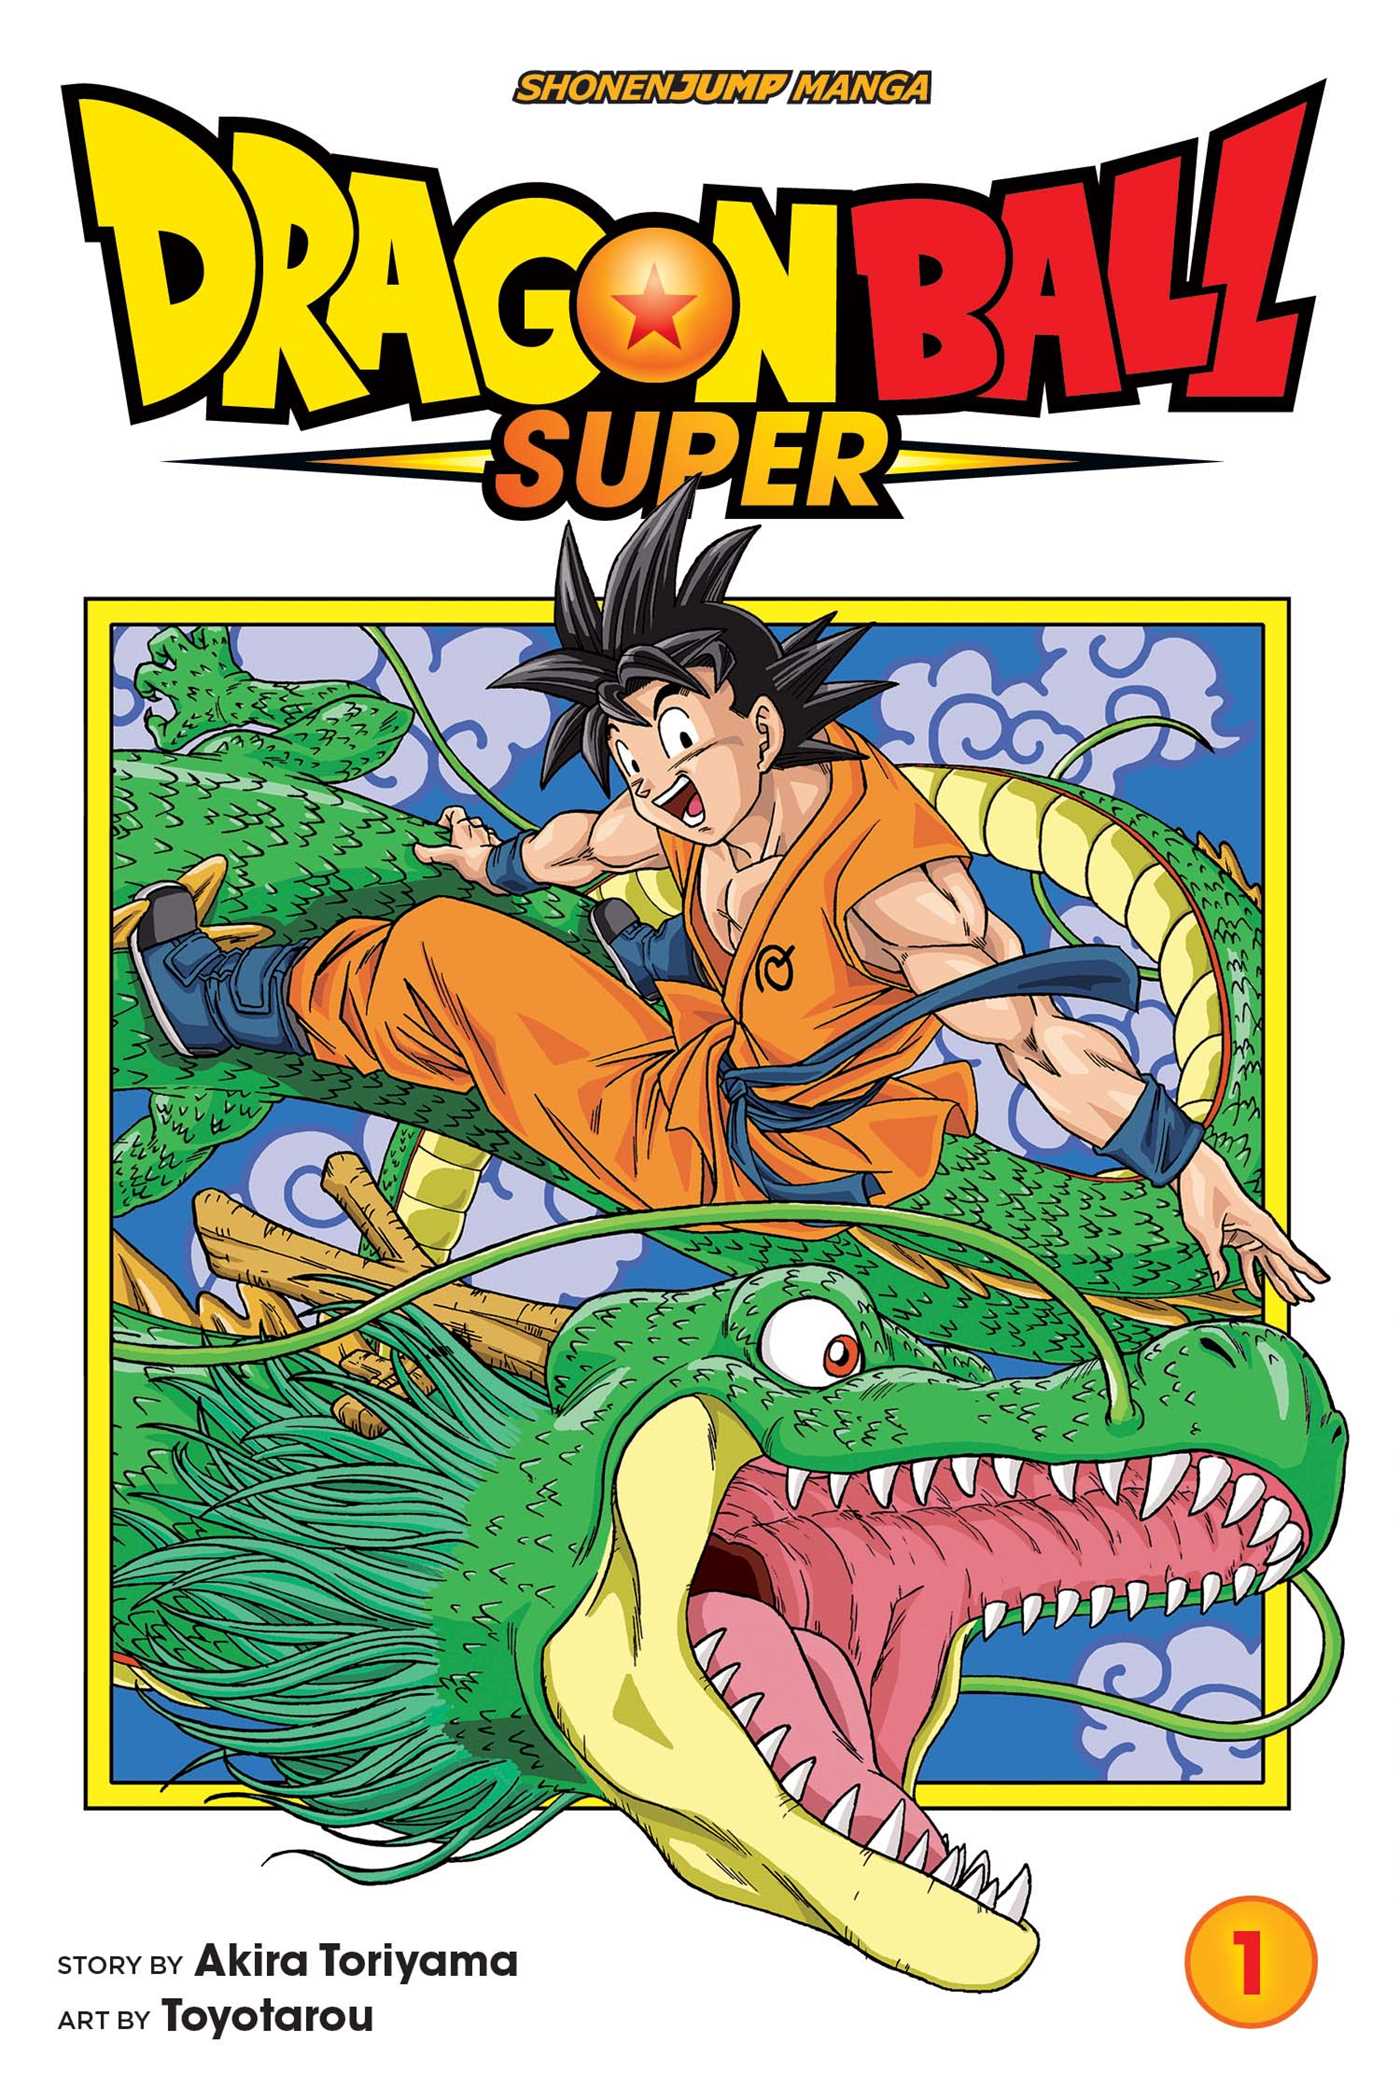 Will Dragon Ball Supers New Movie Set Up the Return of the Show